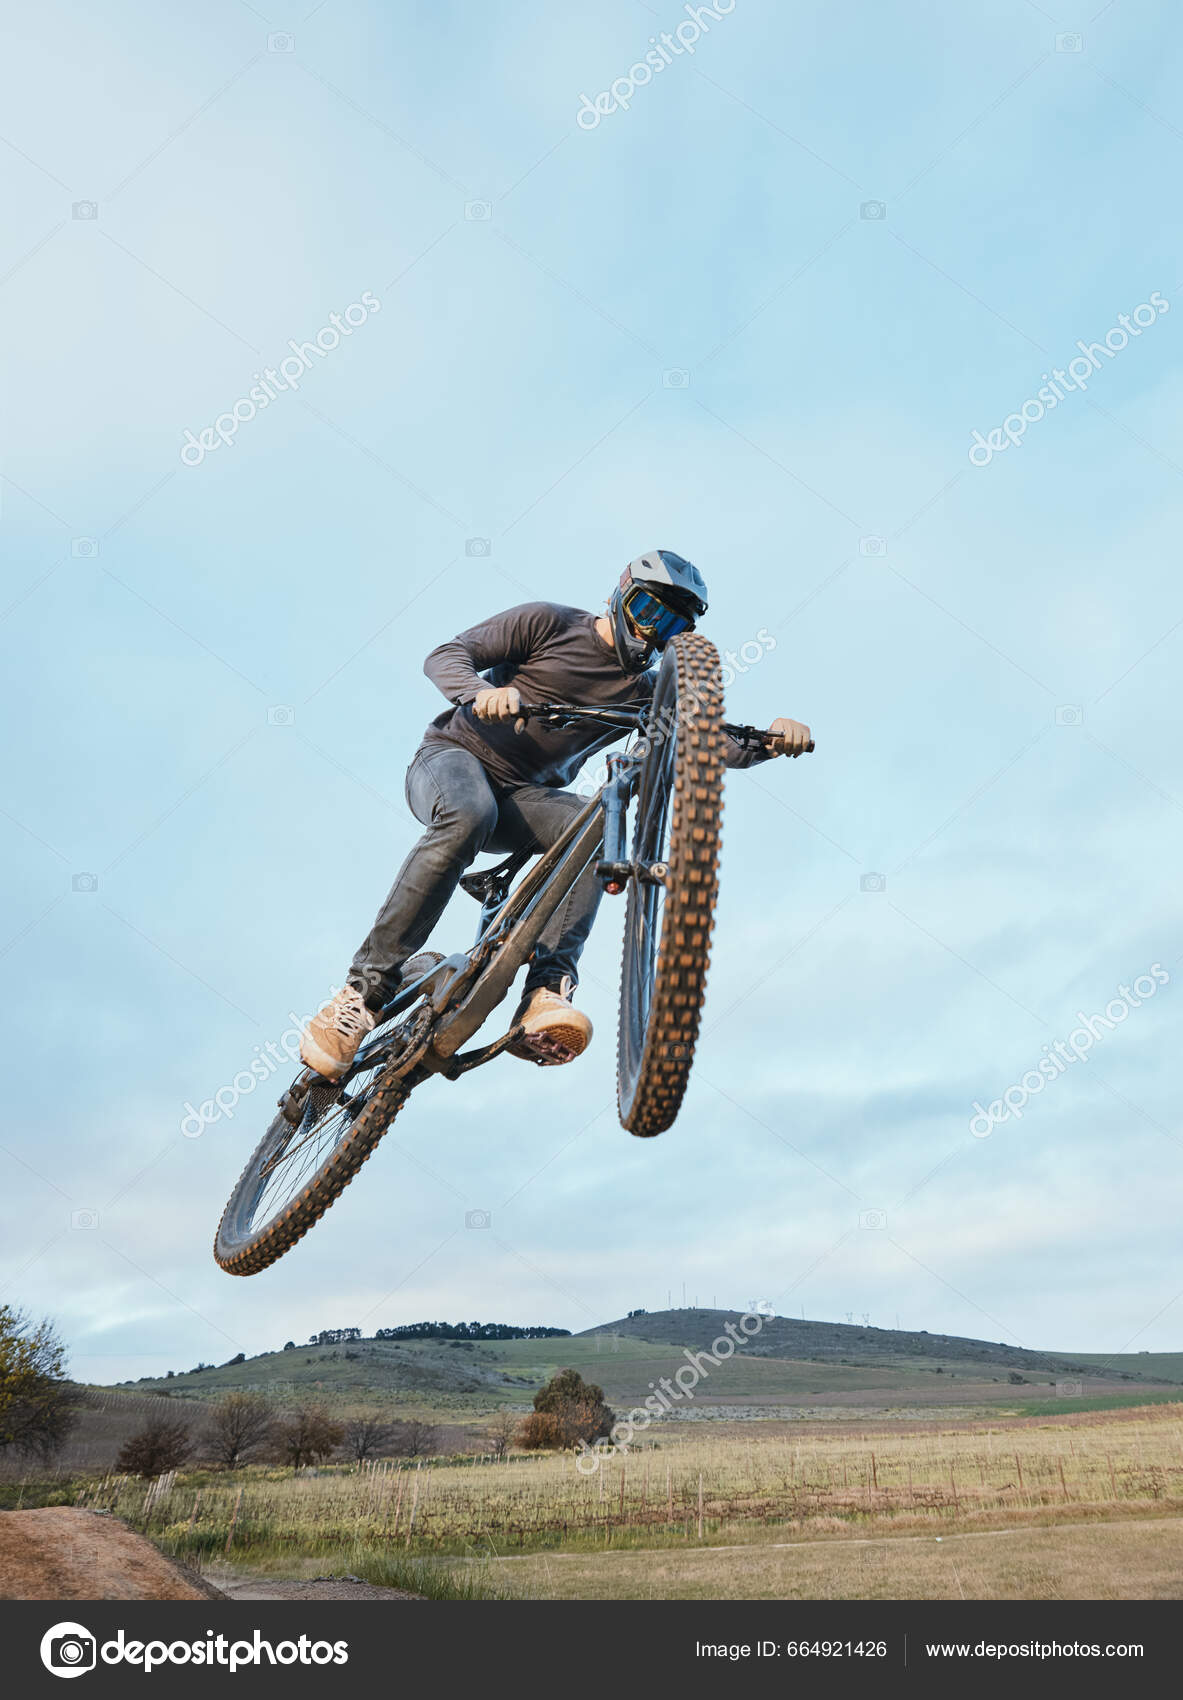 Cycling Fitness Man Bicycle Jump Extreme Sports Energy Adrenaline Nature  Stock Photo by ©PeopleImages.com 664921426